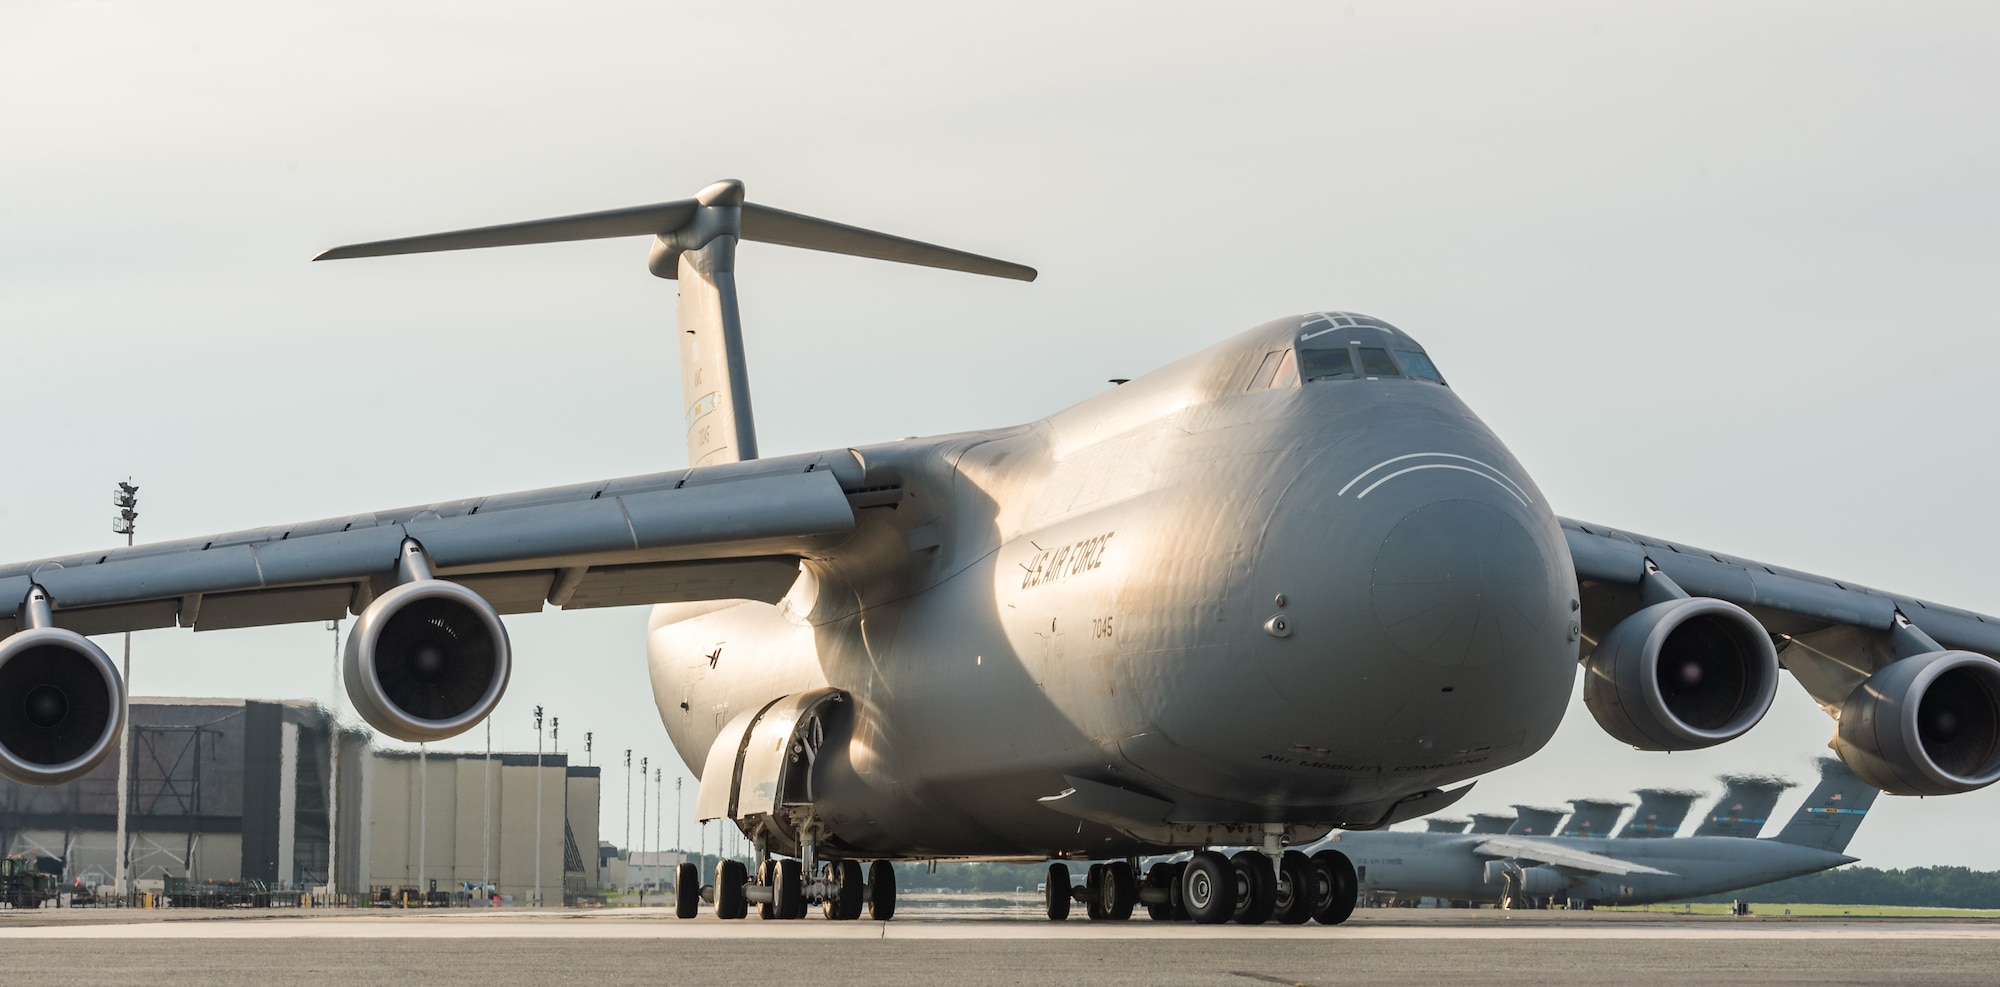 A C-5M Super Galaxy taxis down the flight line prior to an early evening takeoff Aug. 21, 2020, at Dover Air Force Base, Delaware. Eighteen C-5M’s are assigned to Dover AFB, along with 13 C-17 Globemaster IIIs that provide 20 percent of the nation’s outsized airlift capacity. (U.S. Air Force photo by Roland Balik)